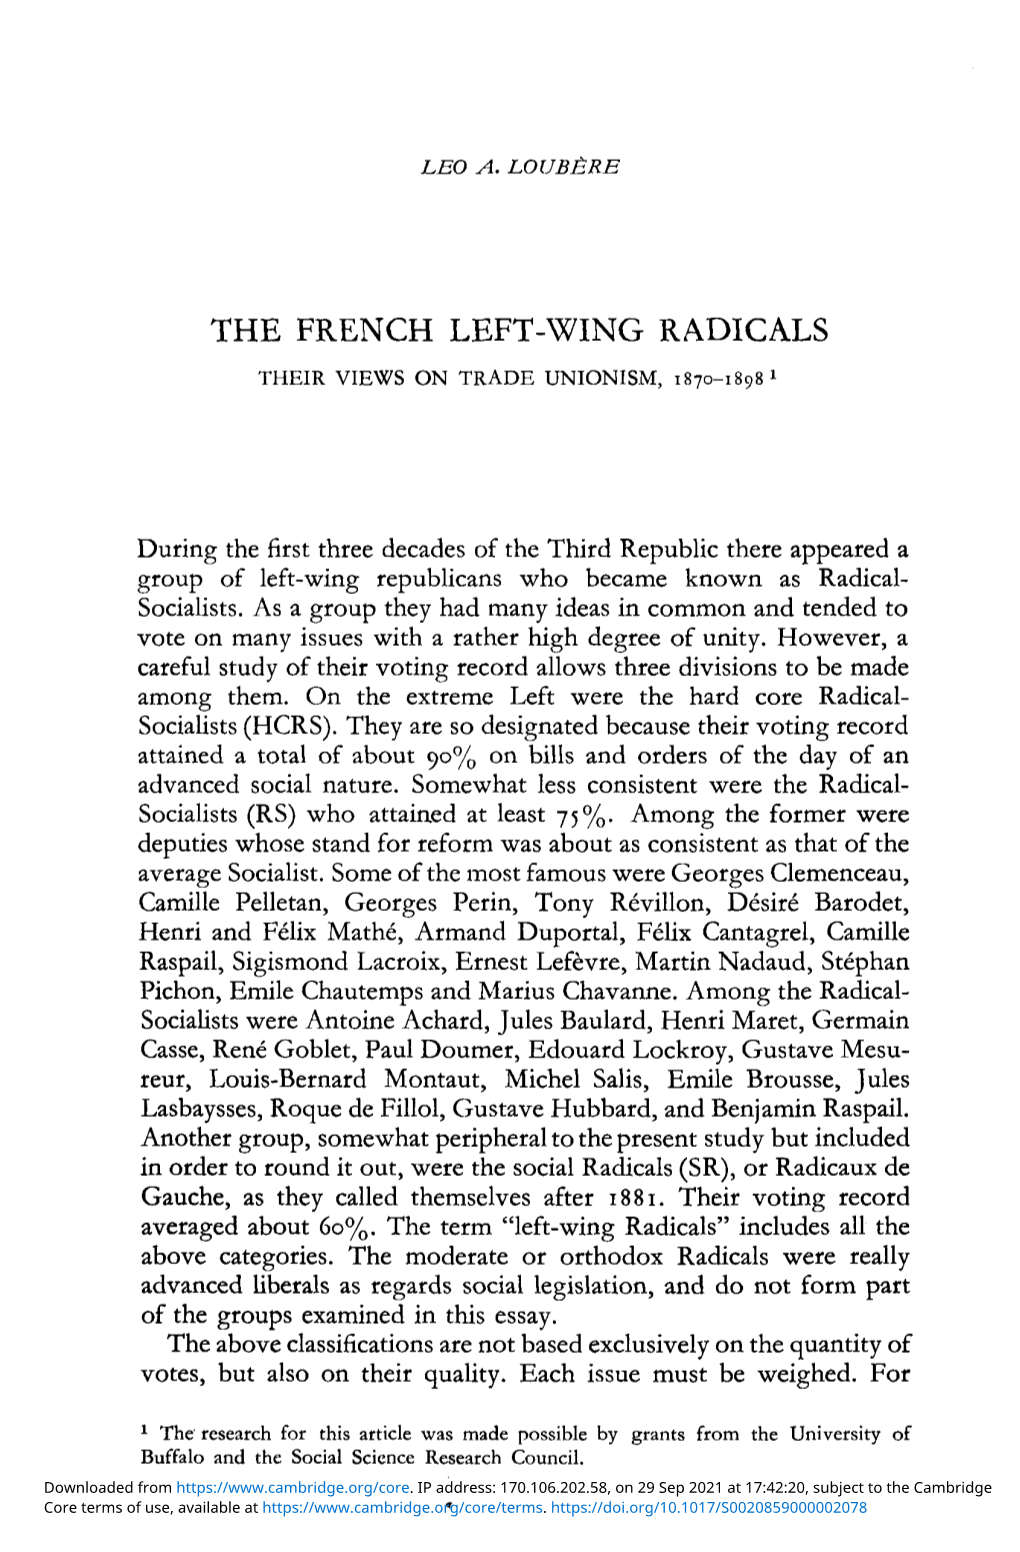 The French Left-Wing Radicals